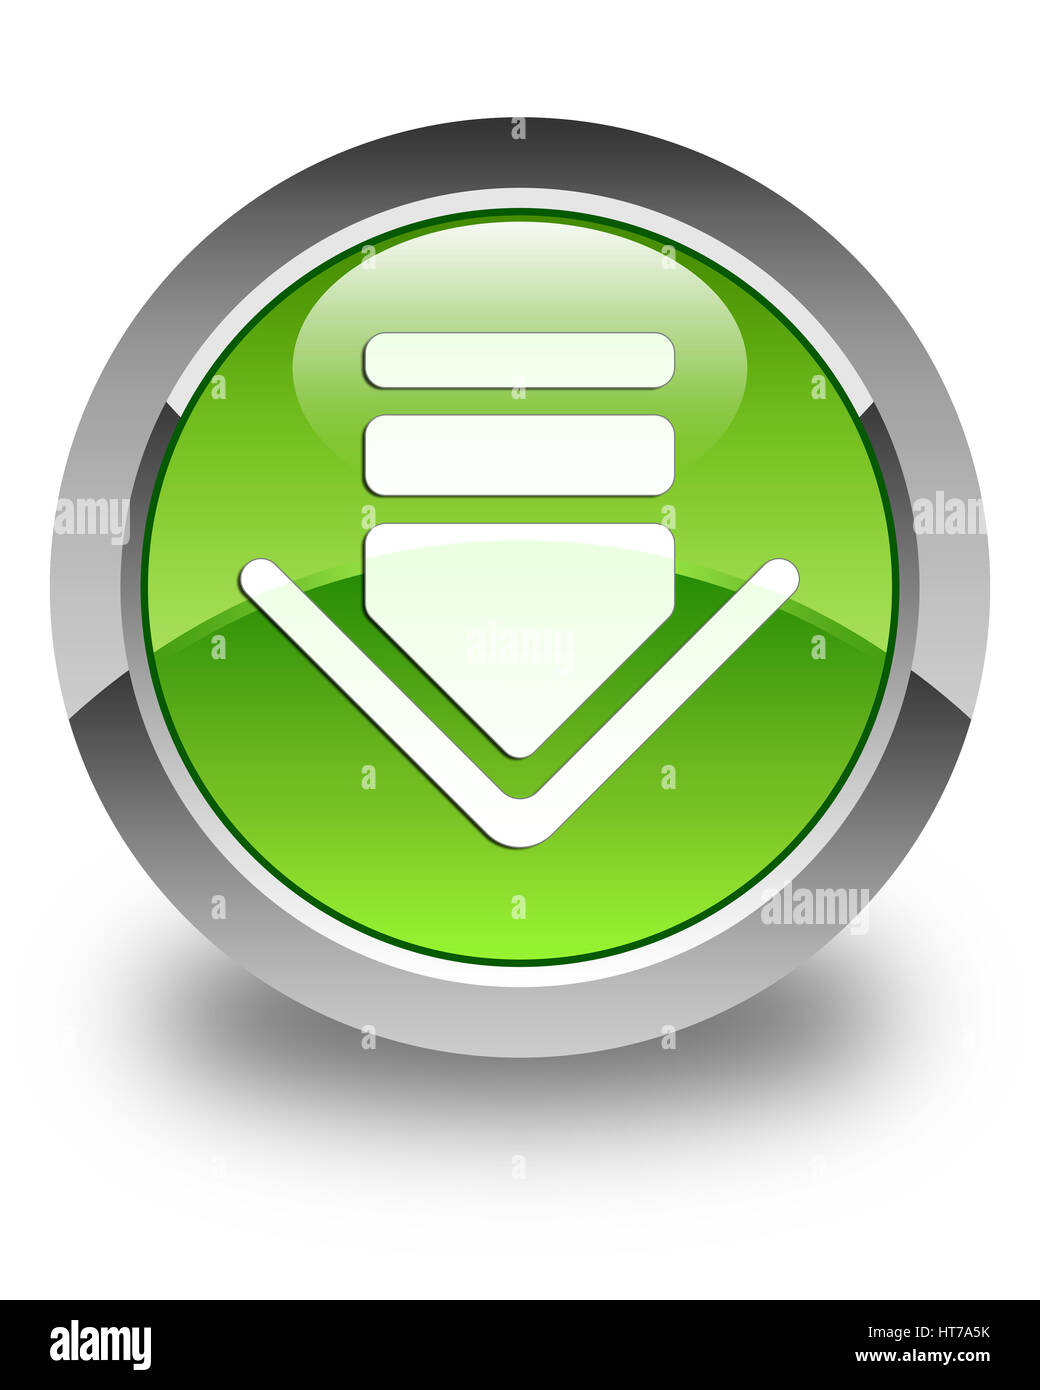 Download icon isolated on glossy green round button abstract illustration Stock Photo